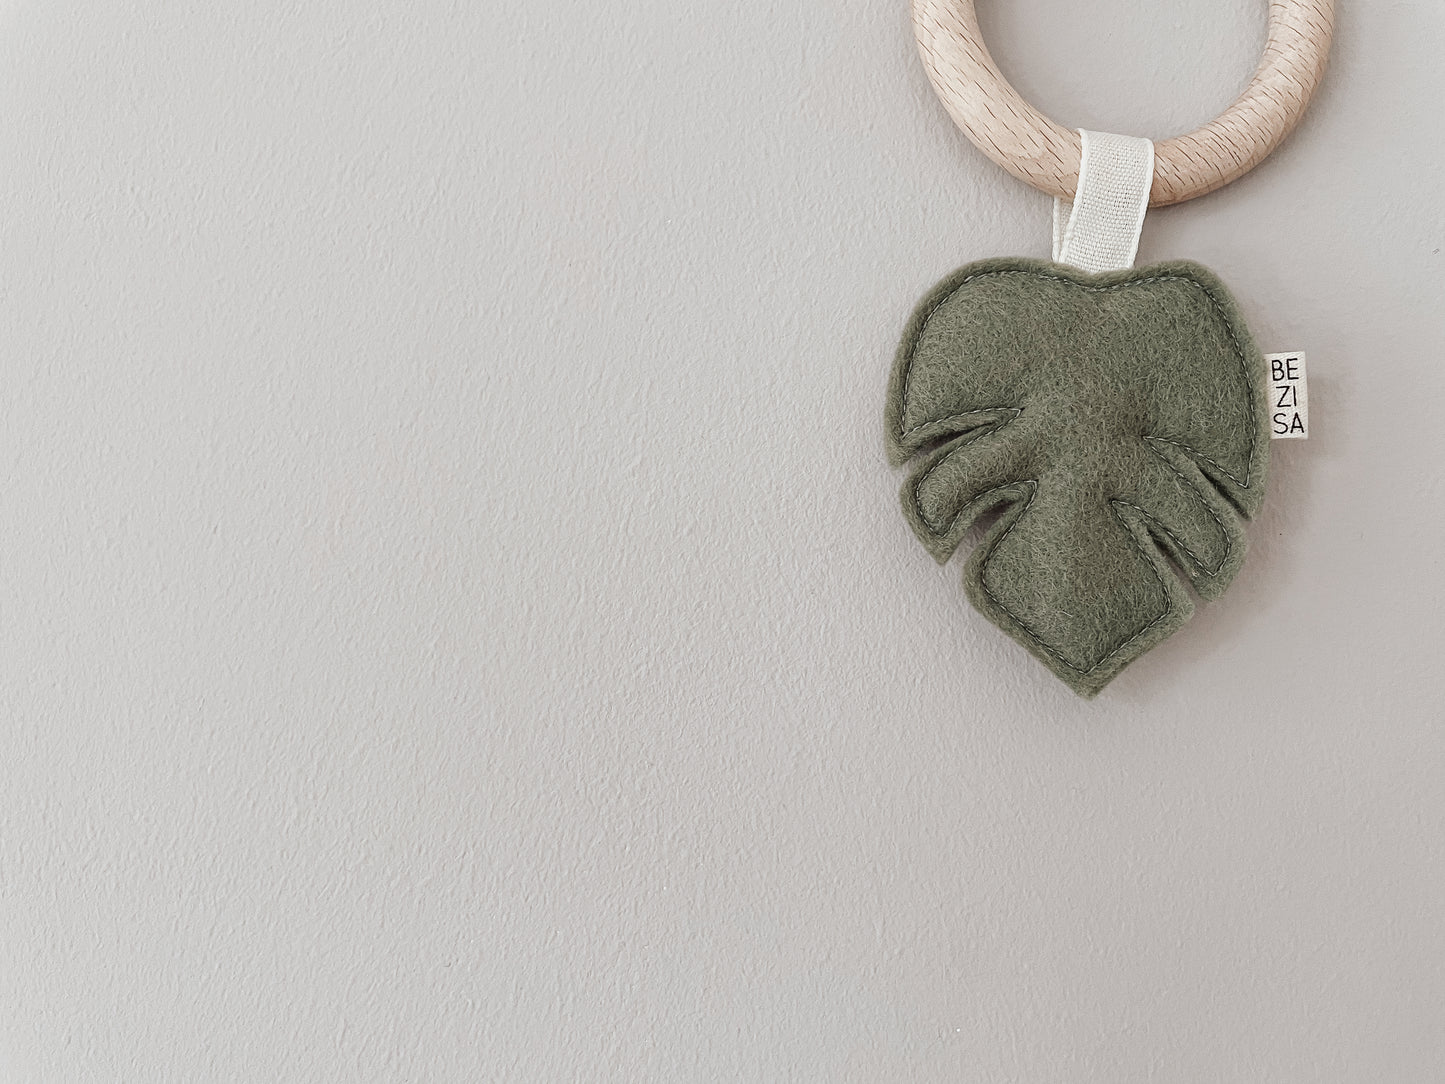 Baby teether from Bezisa, monstera leaf in pistachio green felt with a beech wood ring. Photographed on a plain neutral background.